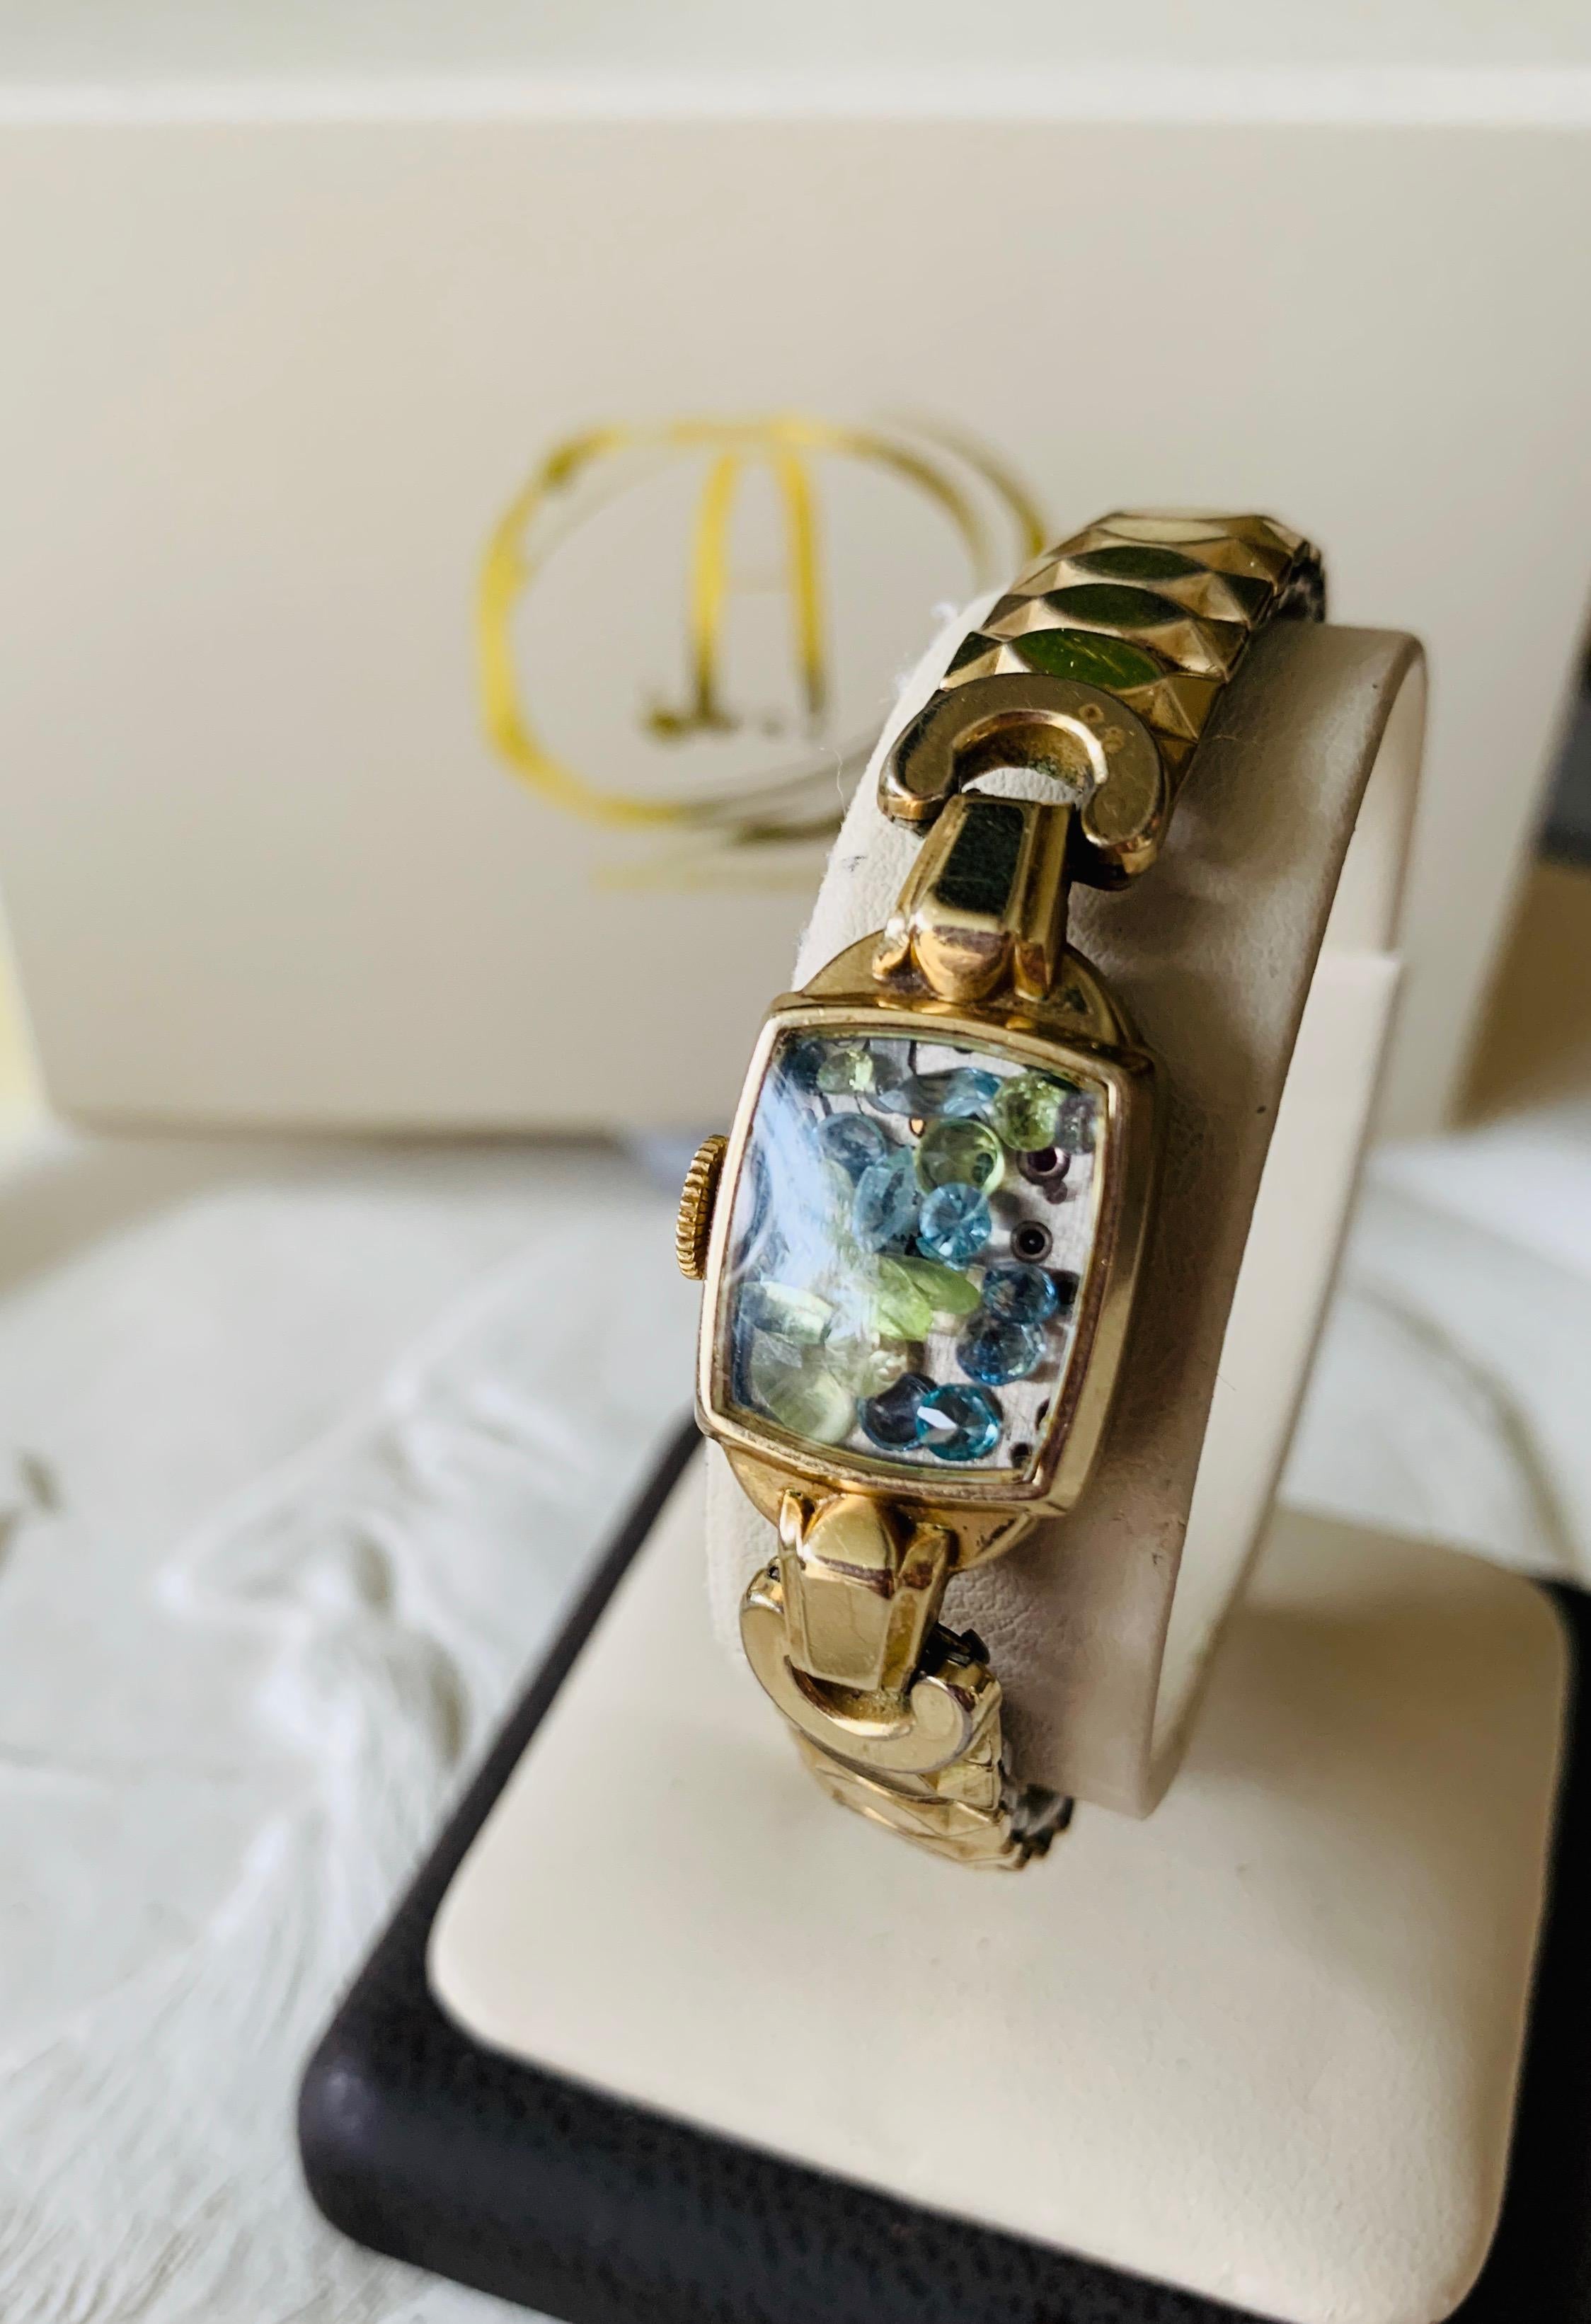 The Fairydust band is a non-functioning antique watch  a symbol, a talisman,
to hold the intention of staying present, neither dwelling in
the past nor looking toward the future. The fairydust inside this particular band is over 2 carats of Vintage